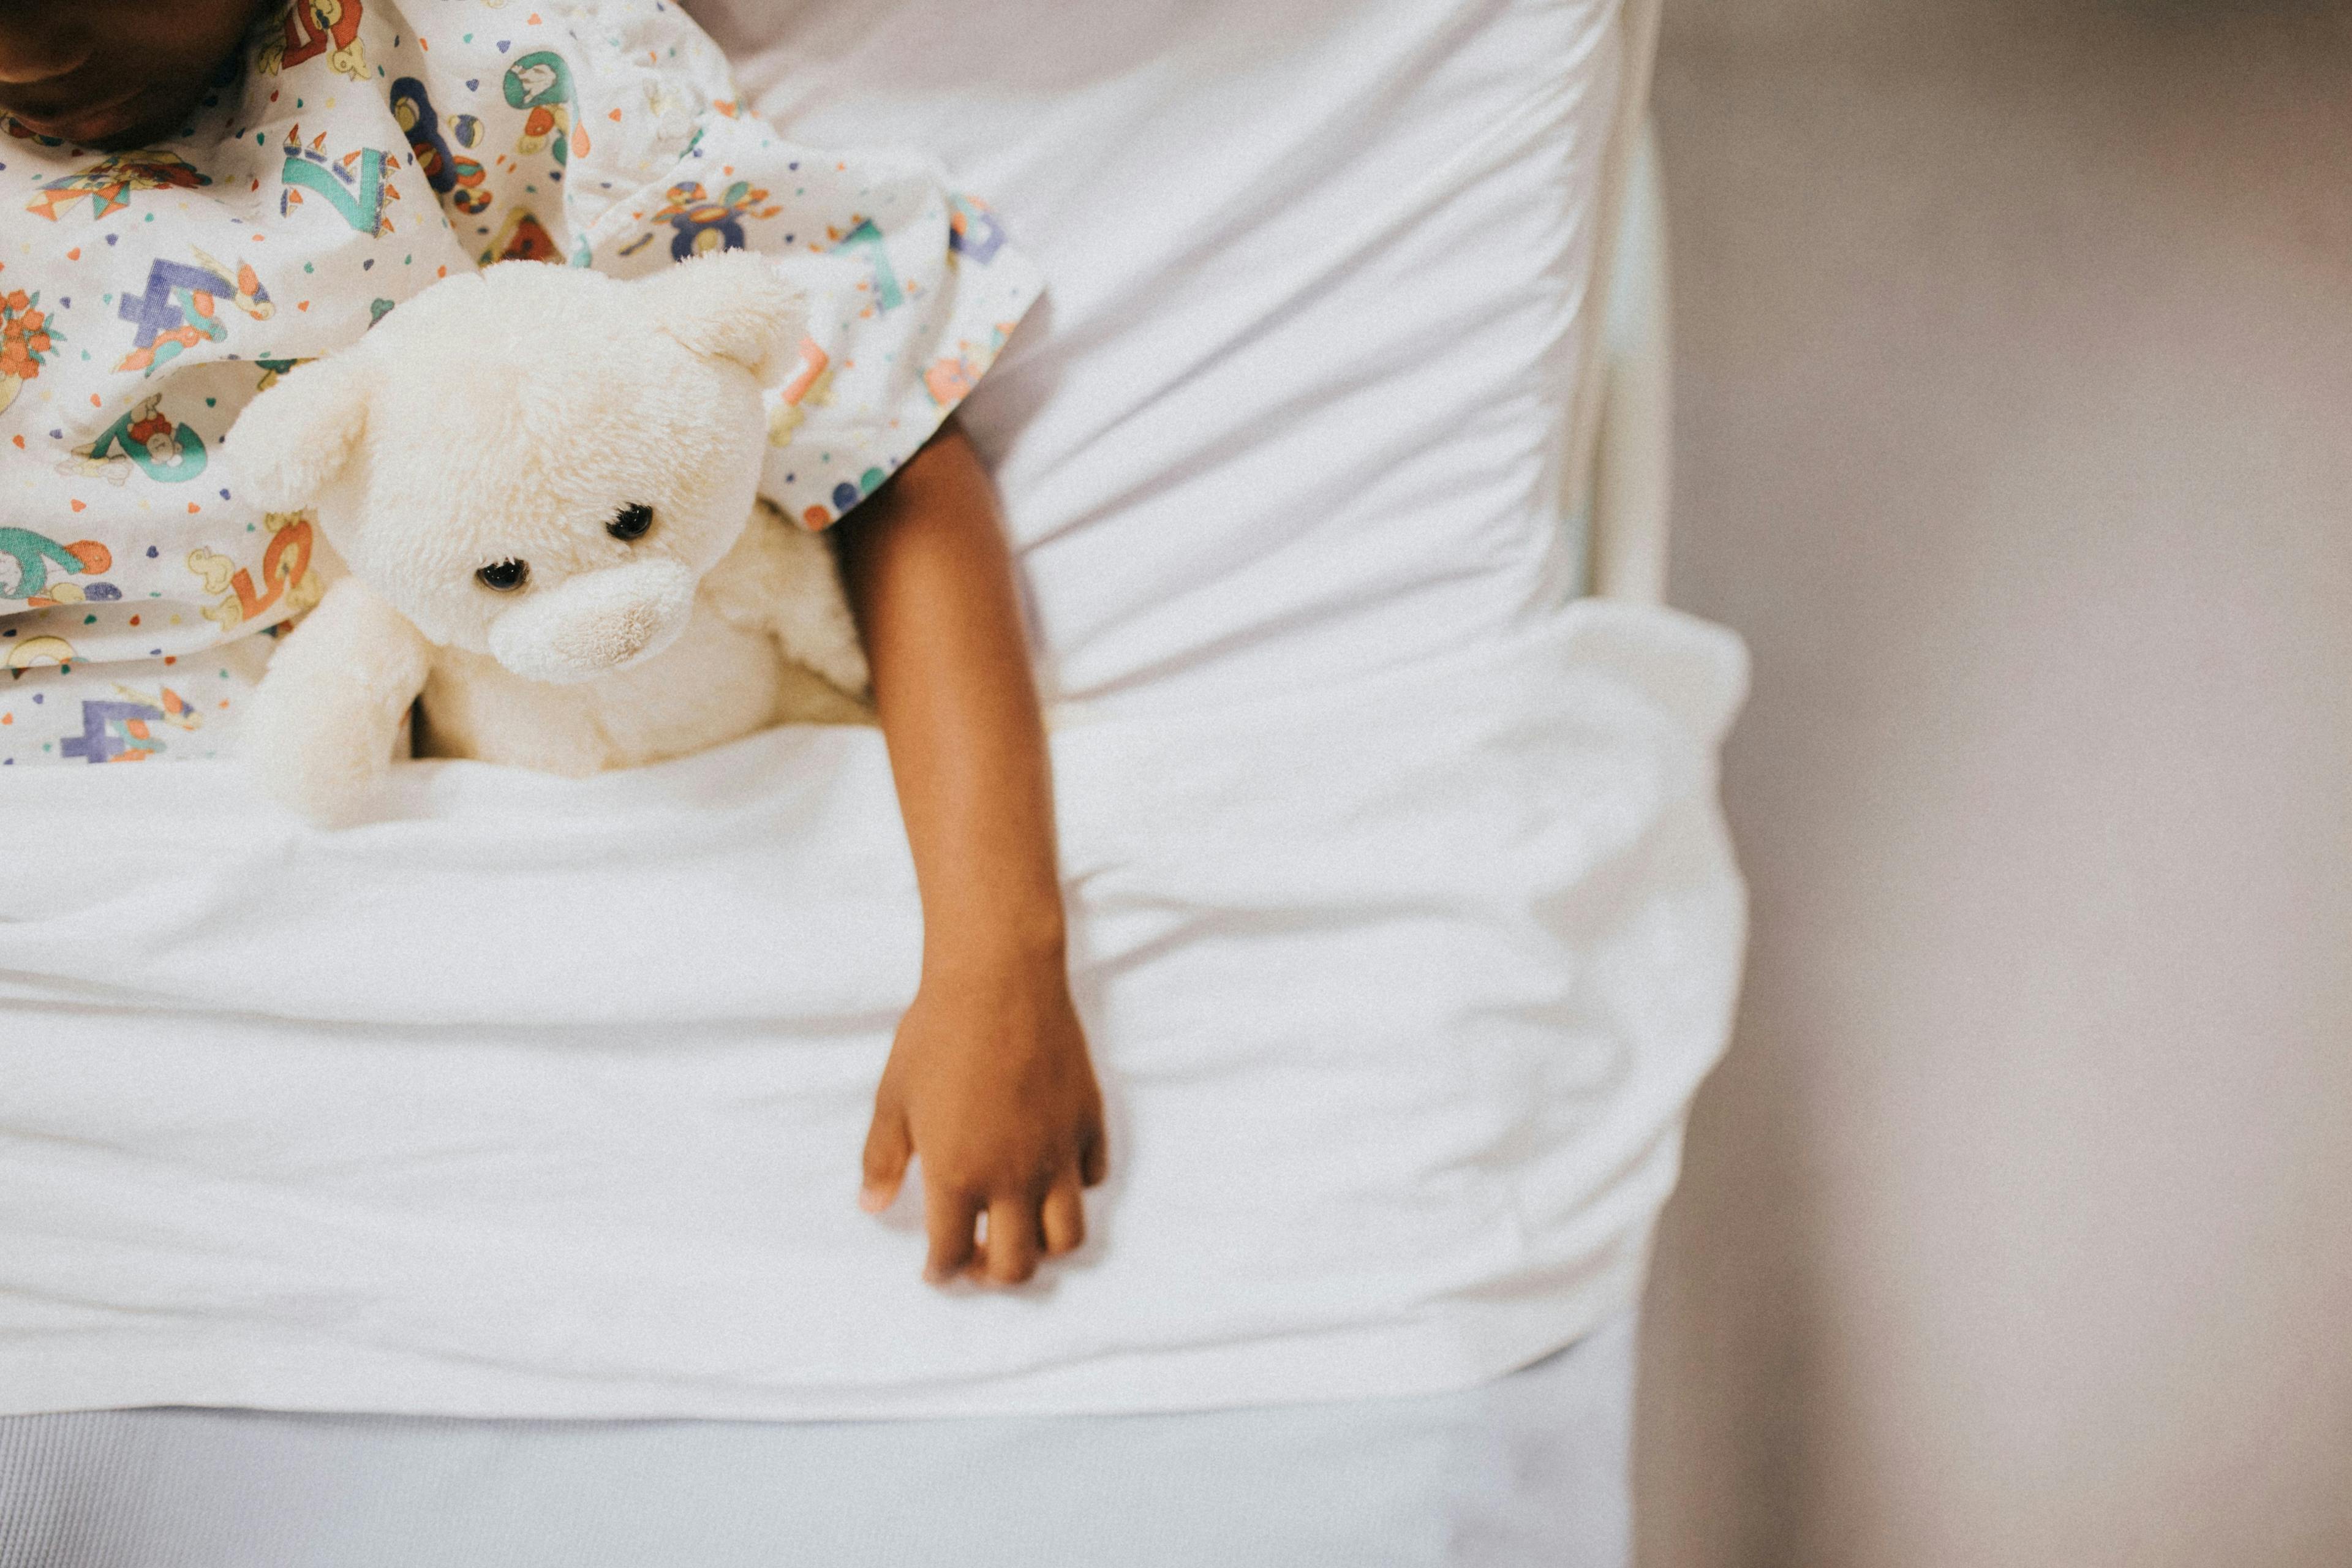 Child in a hospital bed | Image credit: Rawpixel.com - stock.adobe.com